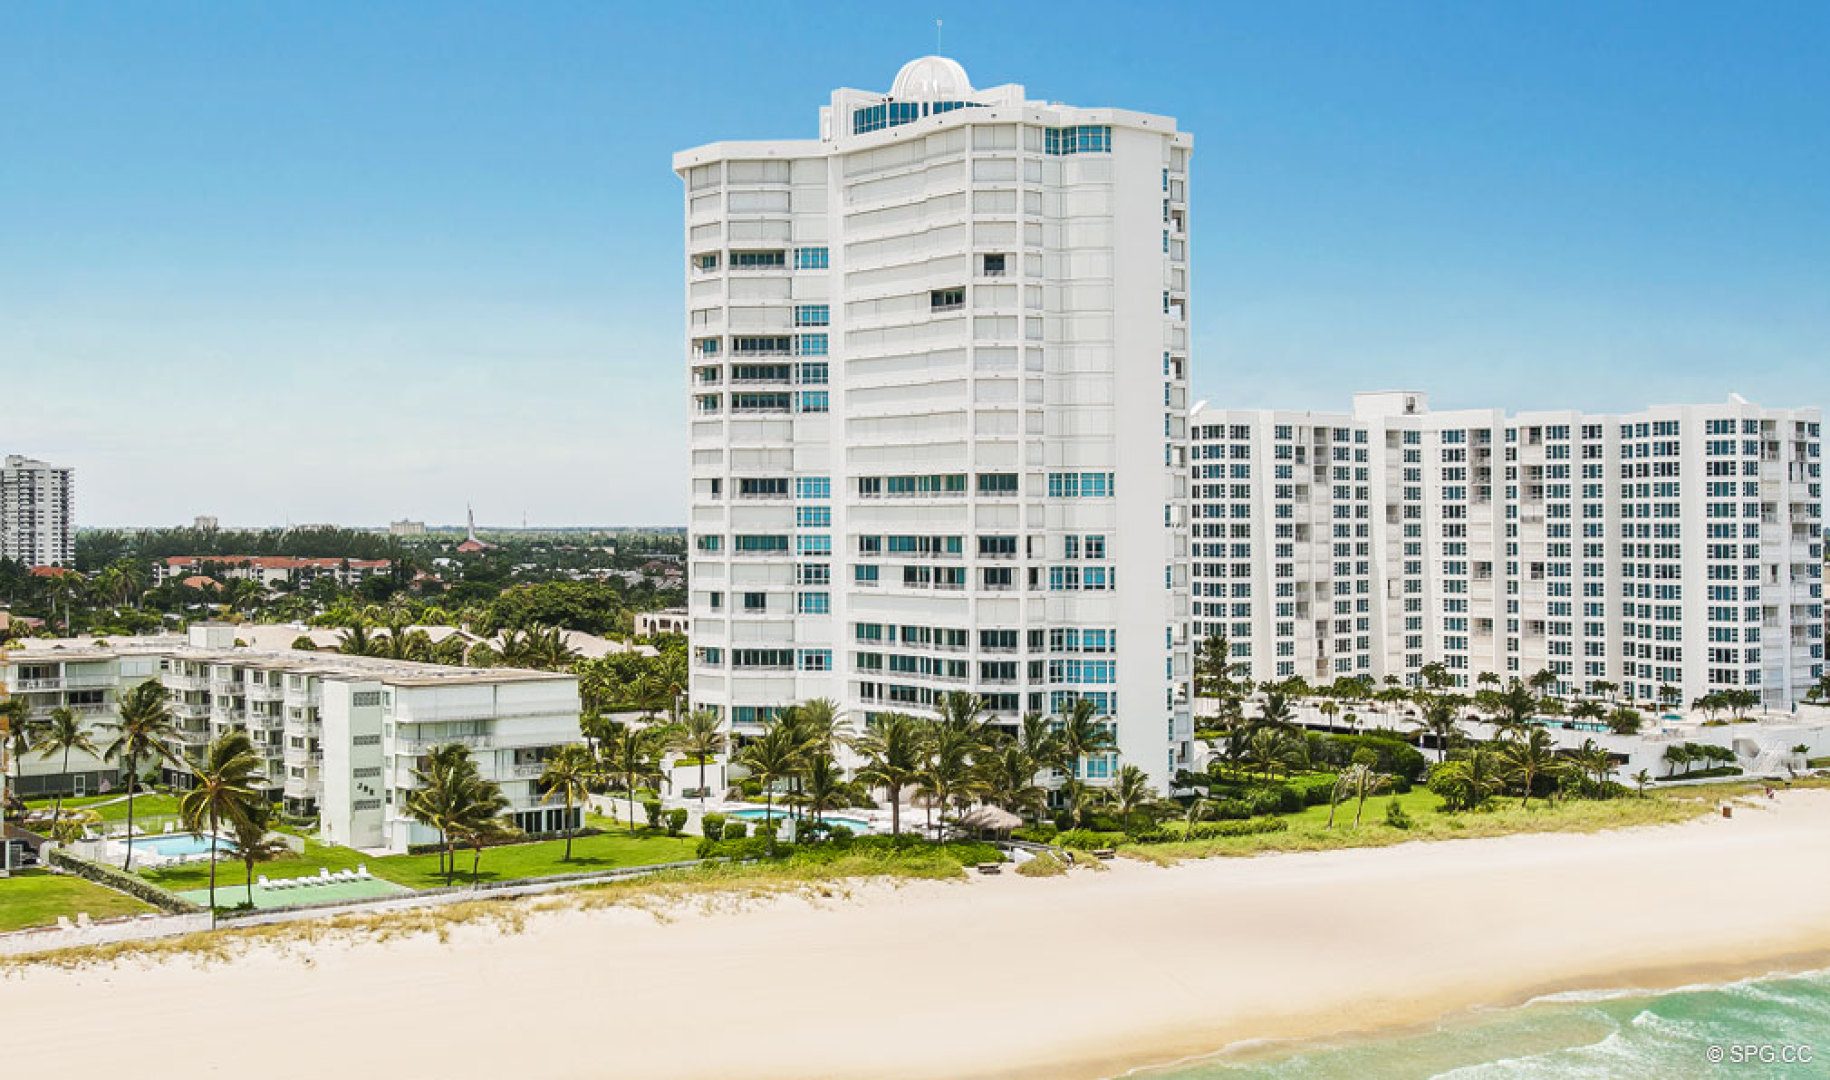 Beach View of Cristelle, Luxury Oceanfront Condos in Lauderdale By The Sea, Florida 33062